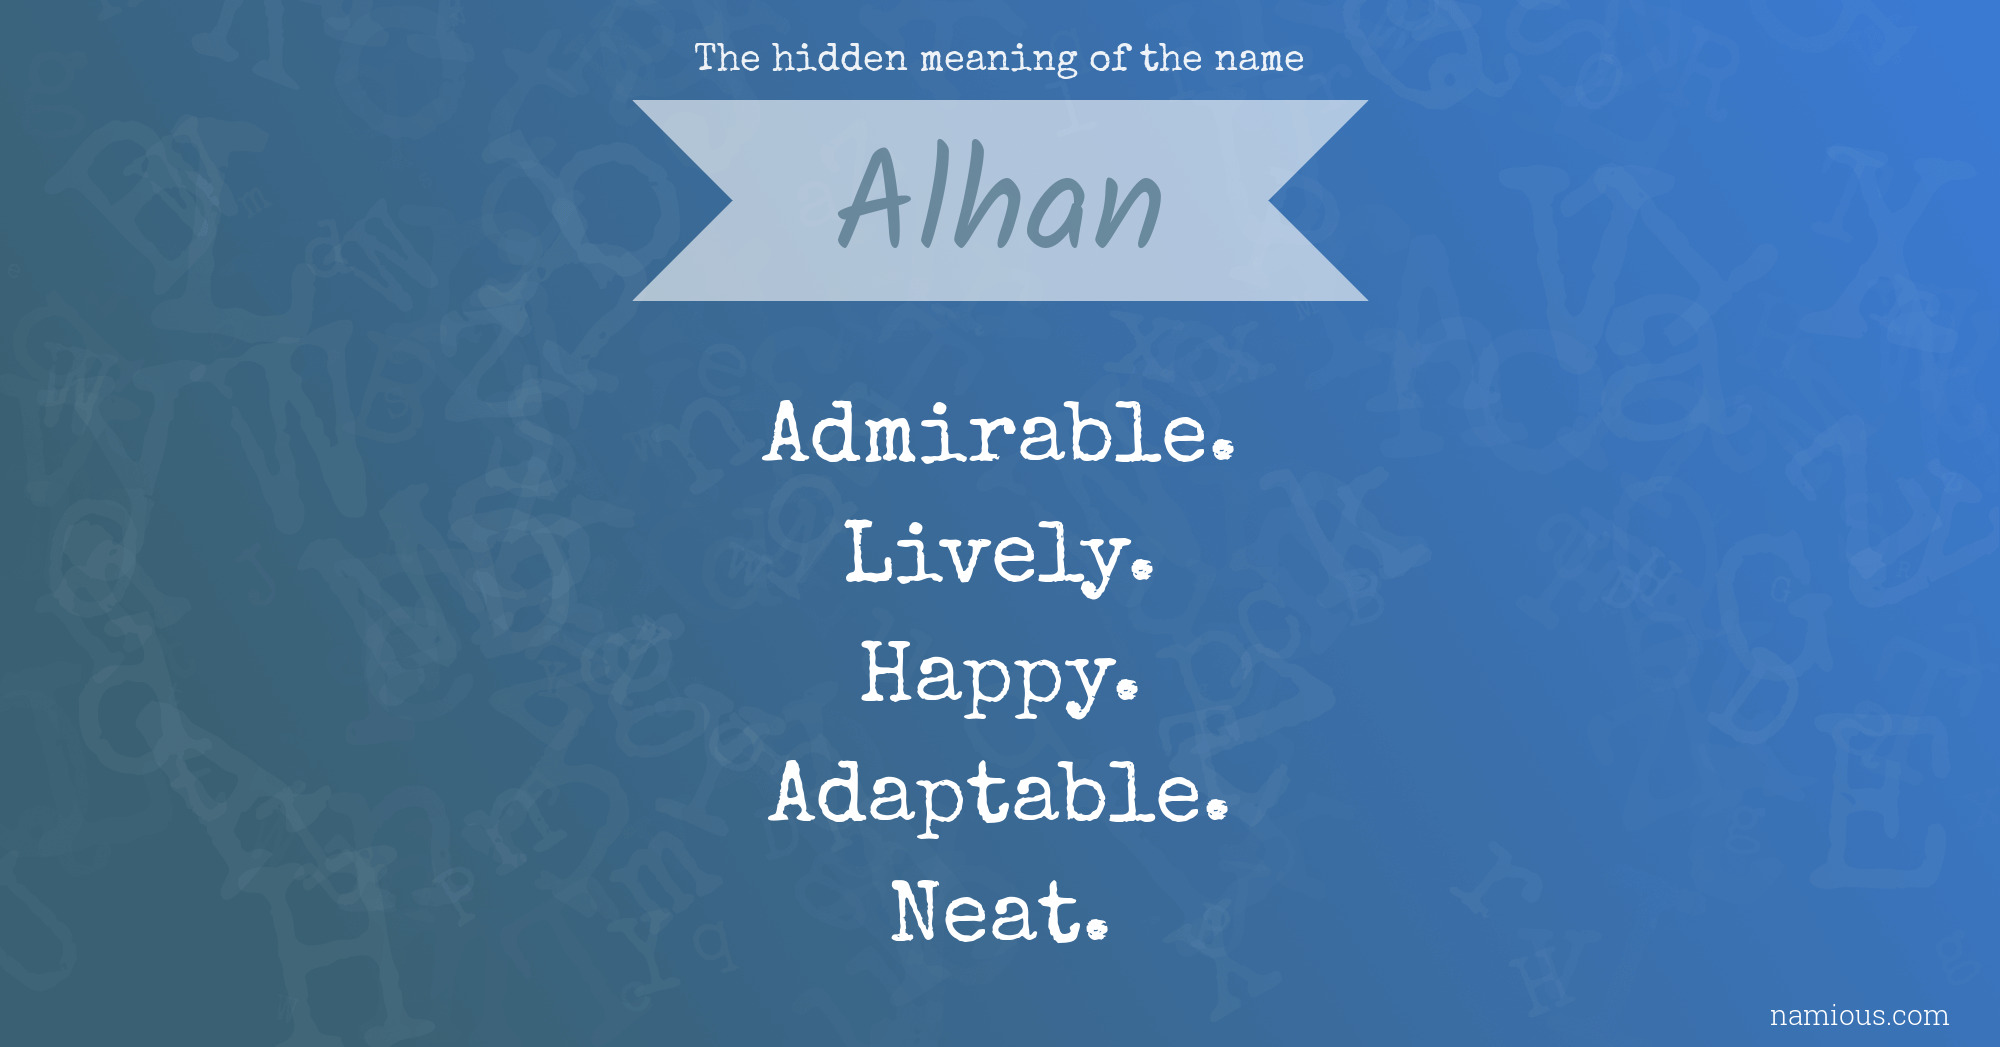 The hidden meaning of the name Alhan